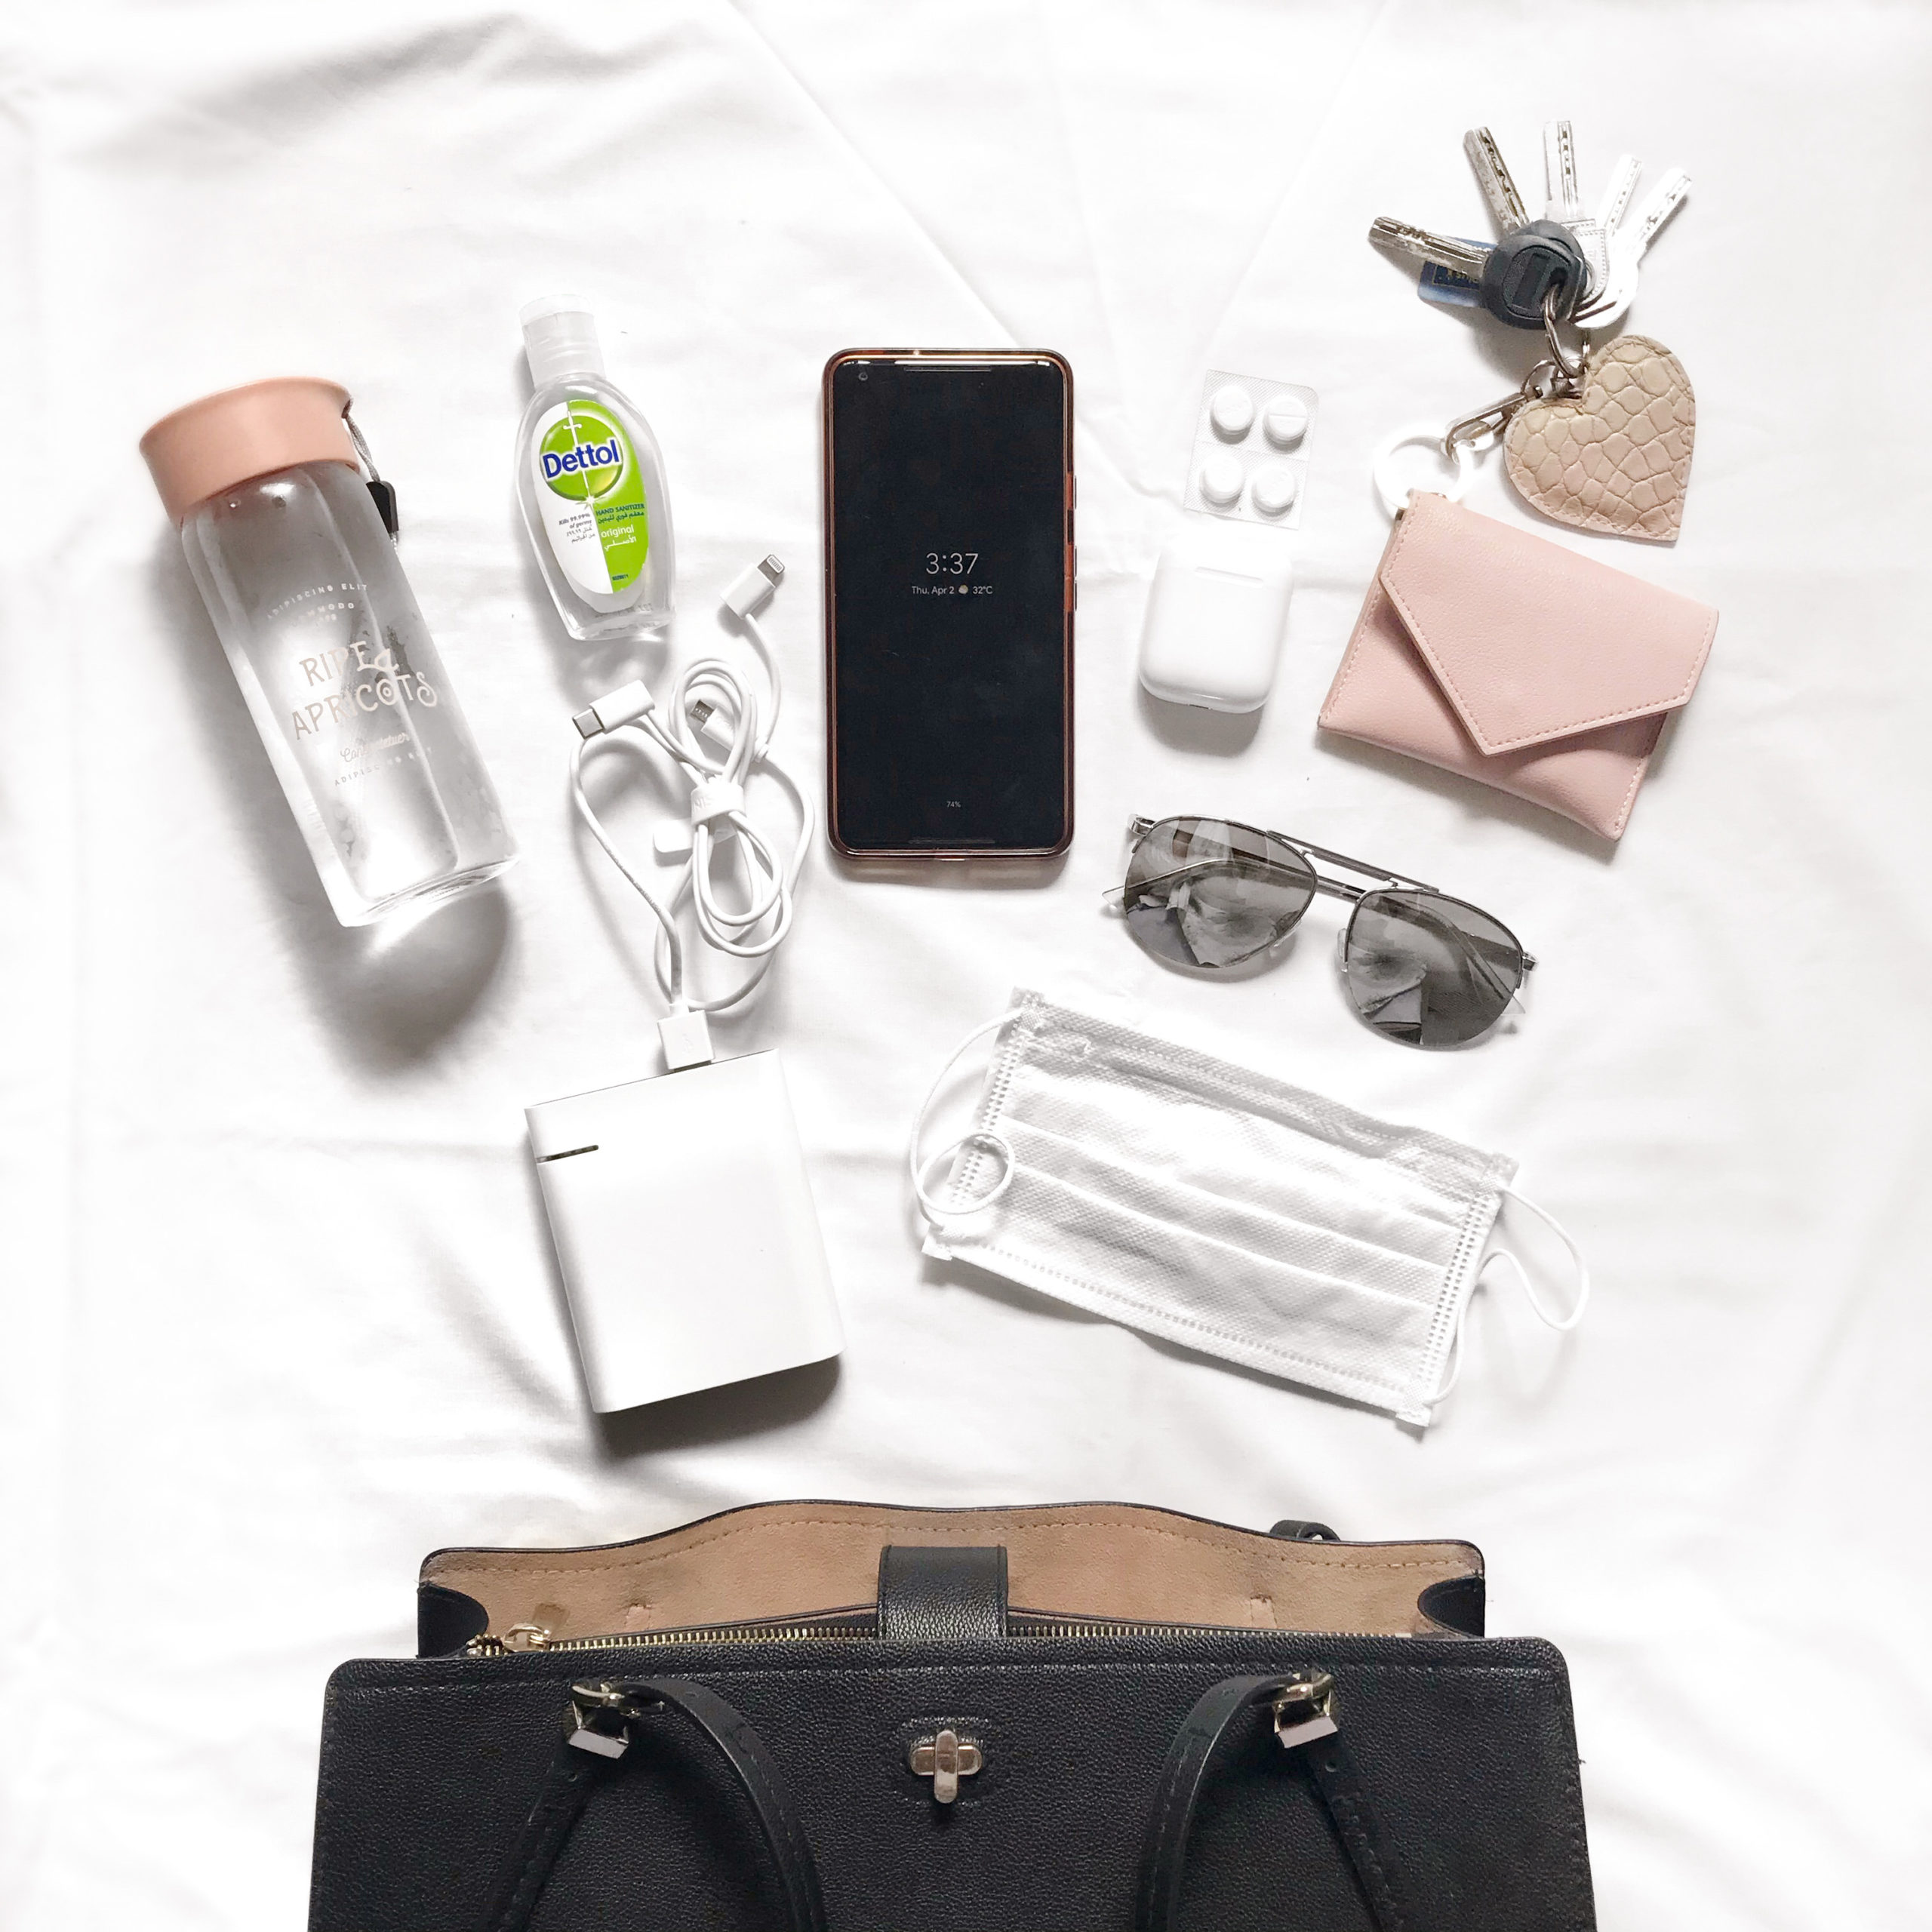 Guest Post from Zoe: What's In my Bag